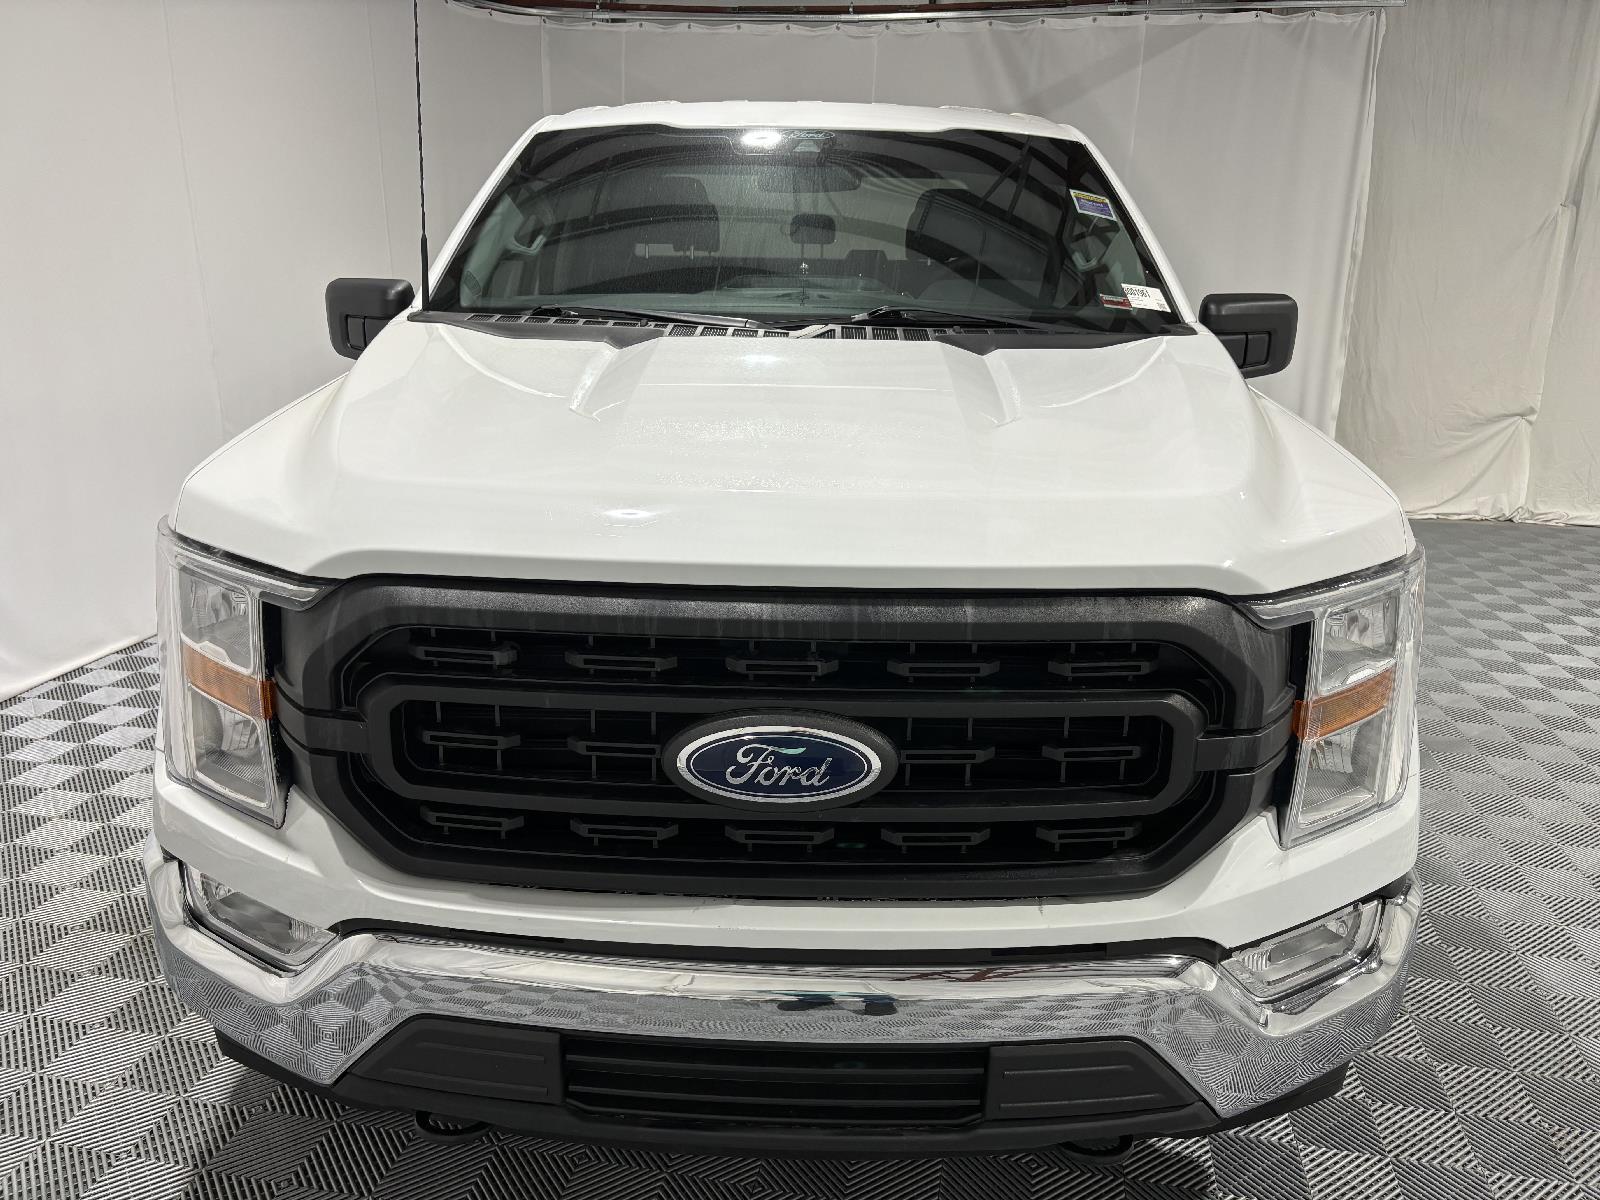 Used 2022 Ford F-150 XL Crew Cab Truck for sale in St Joseph MO